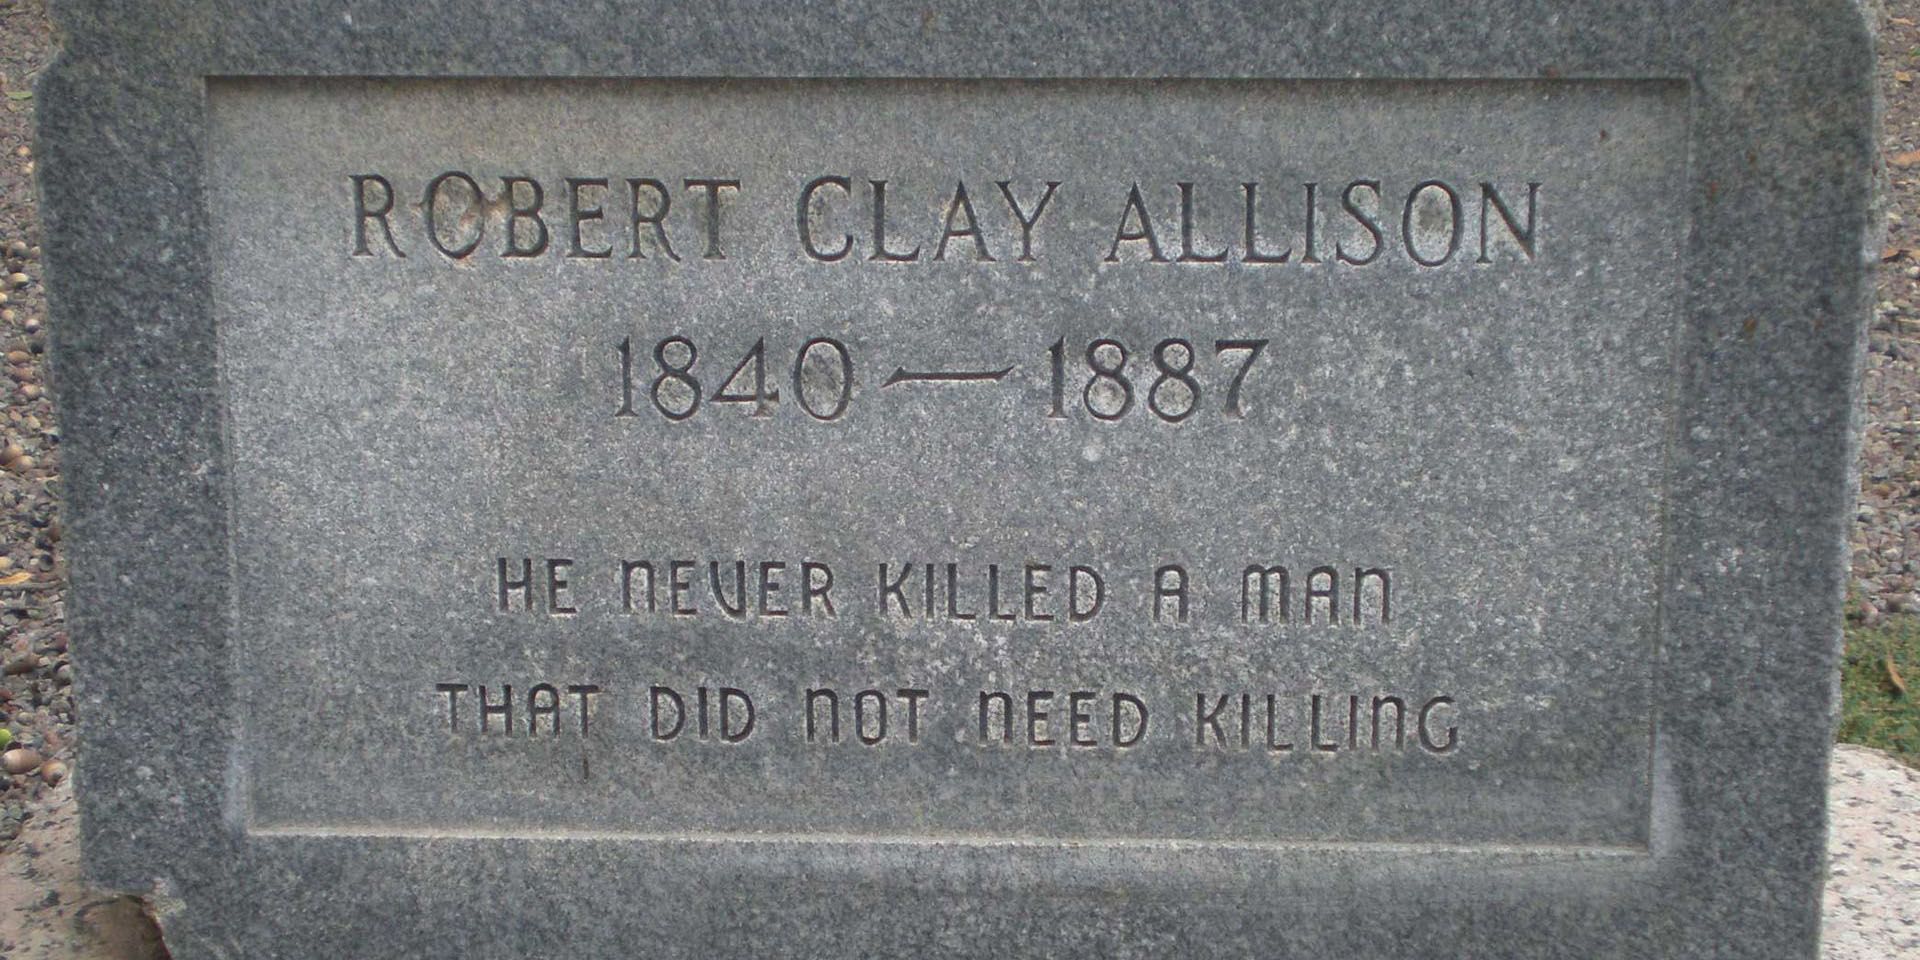 Funny Headstones from the South - Southern Epitaphs with a Sense of Humor